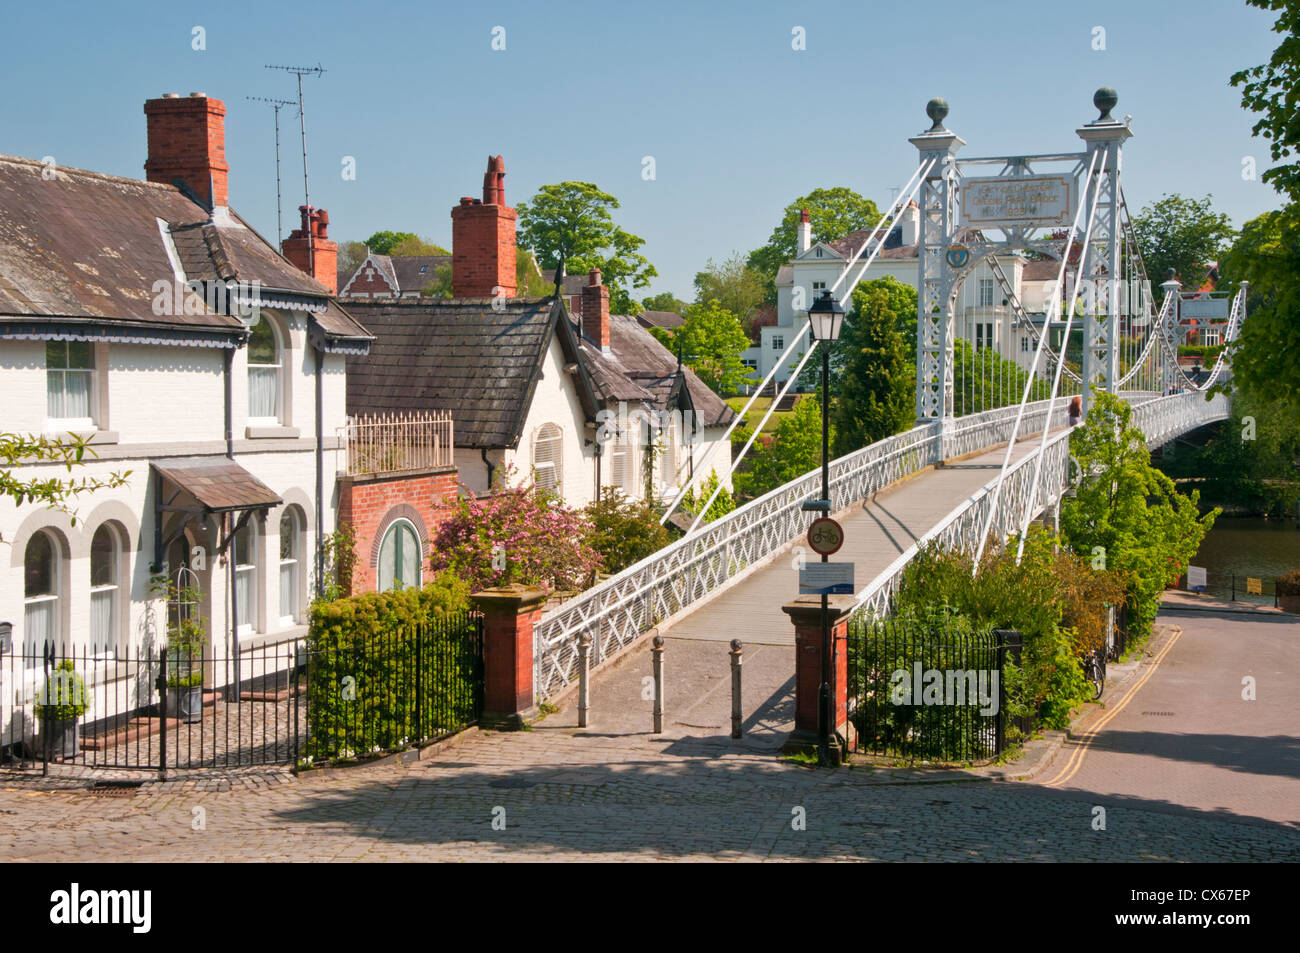 Queens Park Bridge & River Dee, The Groves, Chester, Cheshire, England, UK Stock Photo